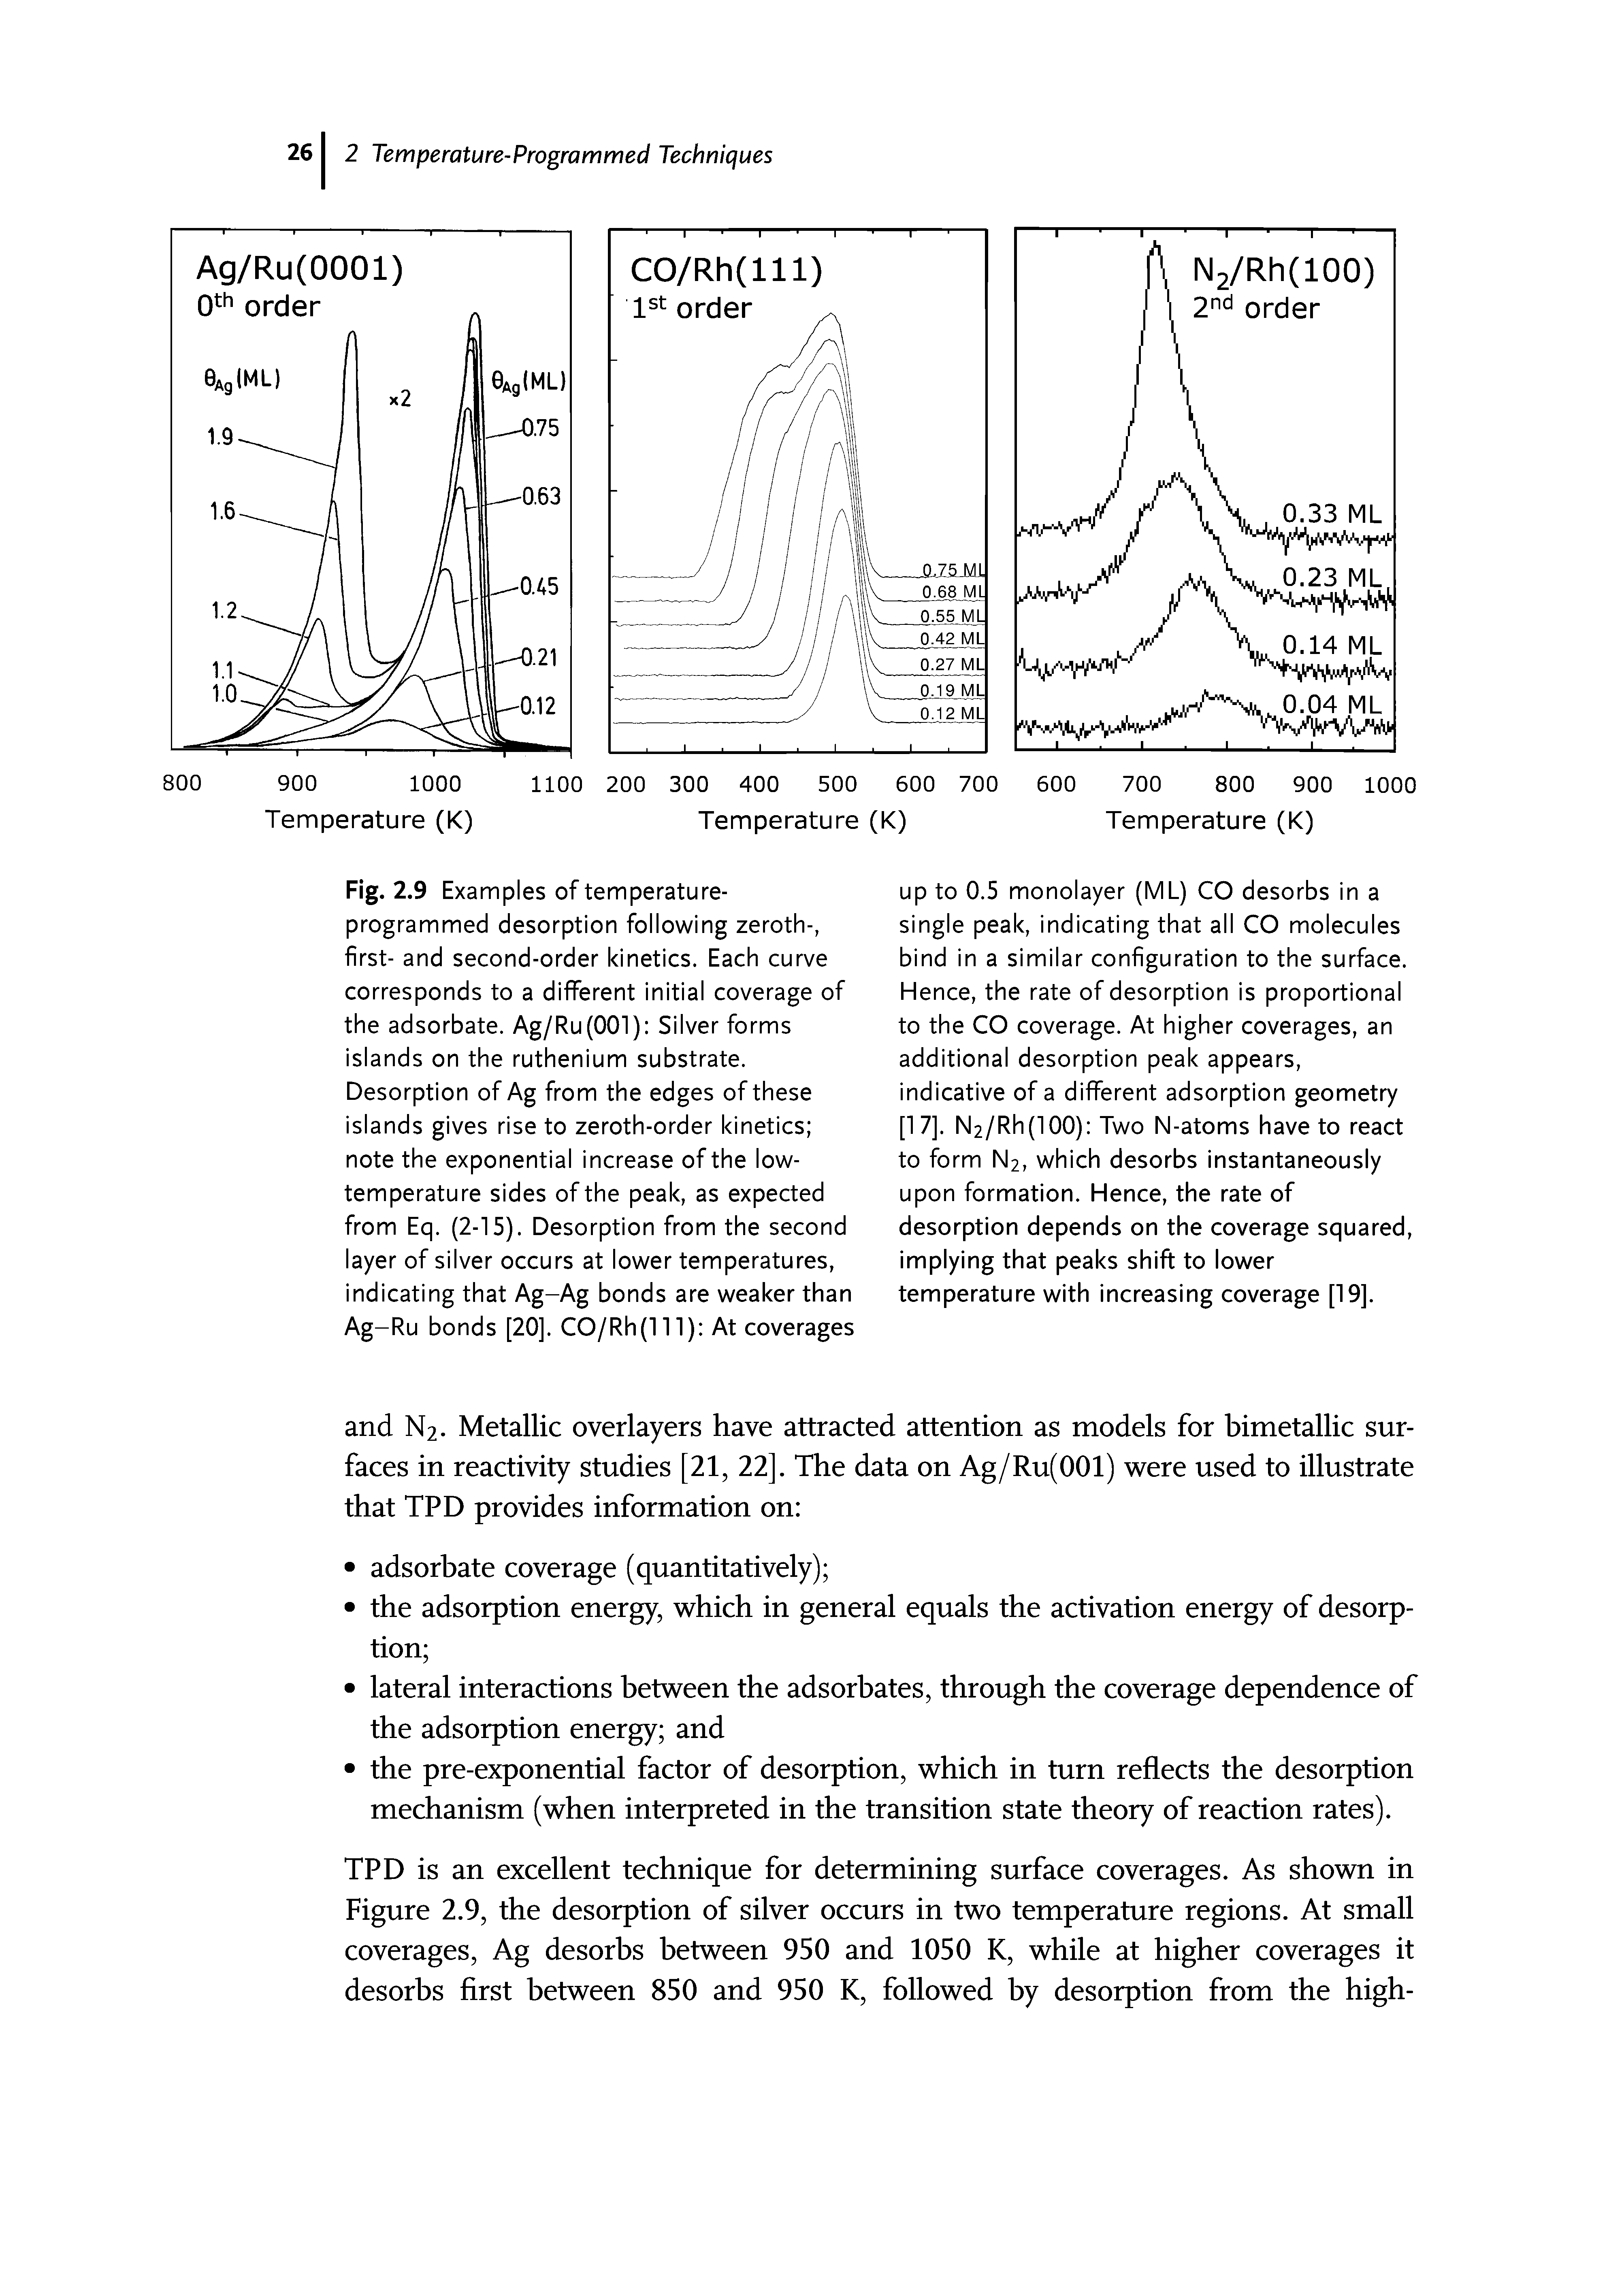 Fig. 2.9 Examples of temperature-programmed desorption following zeroth-, first- and second-order kinetics. Each curve corresponds to a different initial coverage of the adsorbate. Ag/Ru(001) Silver forms islands on the ruthenium substrate. Desorption of Ag from the edges of these islands gives rise to zeroth-order kinetics note the exponential increase of the low-temperature sides of the peak, as expected from Eq. (2-15). Desorption from the second layer of silver occurs at lower temperatures, indicating that Ag-Ag bonds are weaker than Ag-Ru bonds [20]. CO/Rh(111) At coverages...